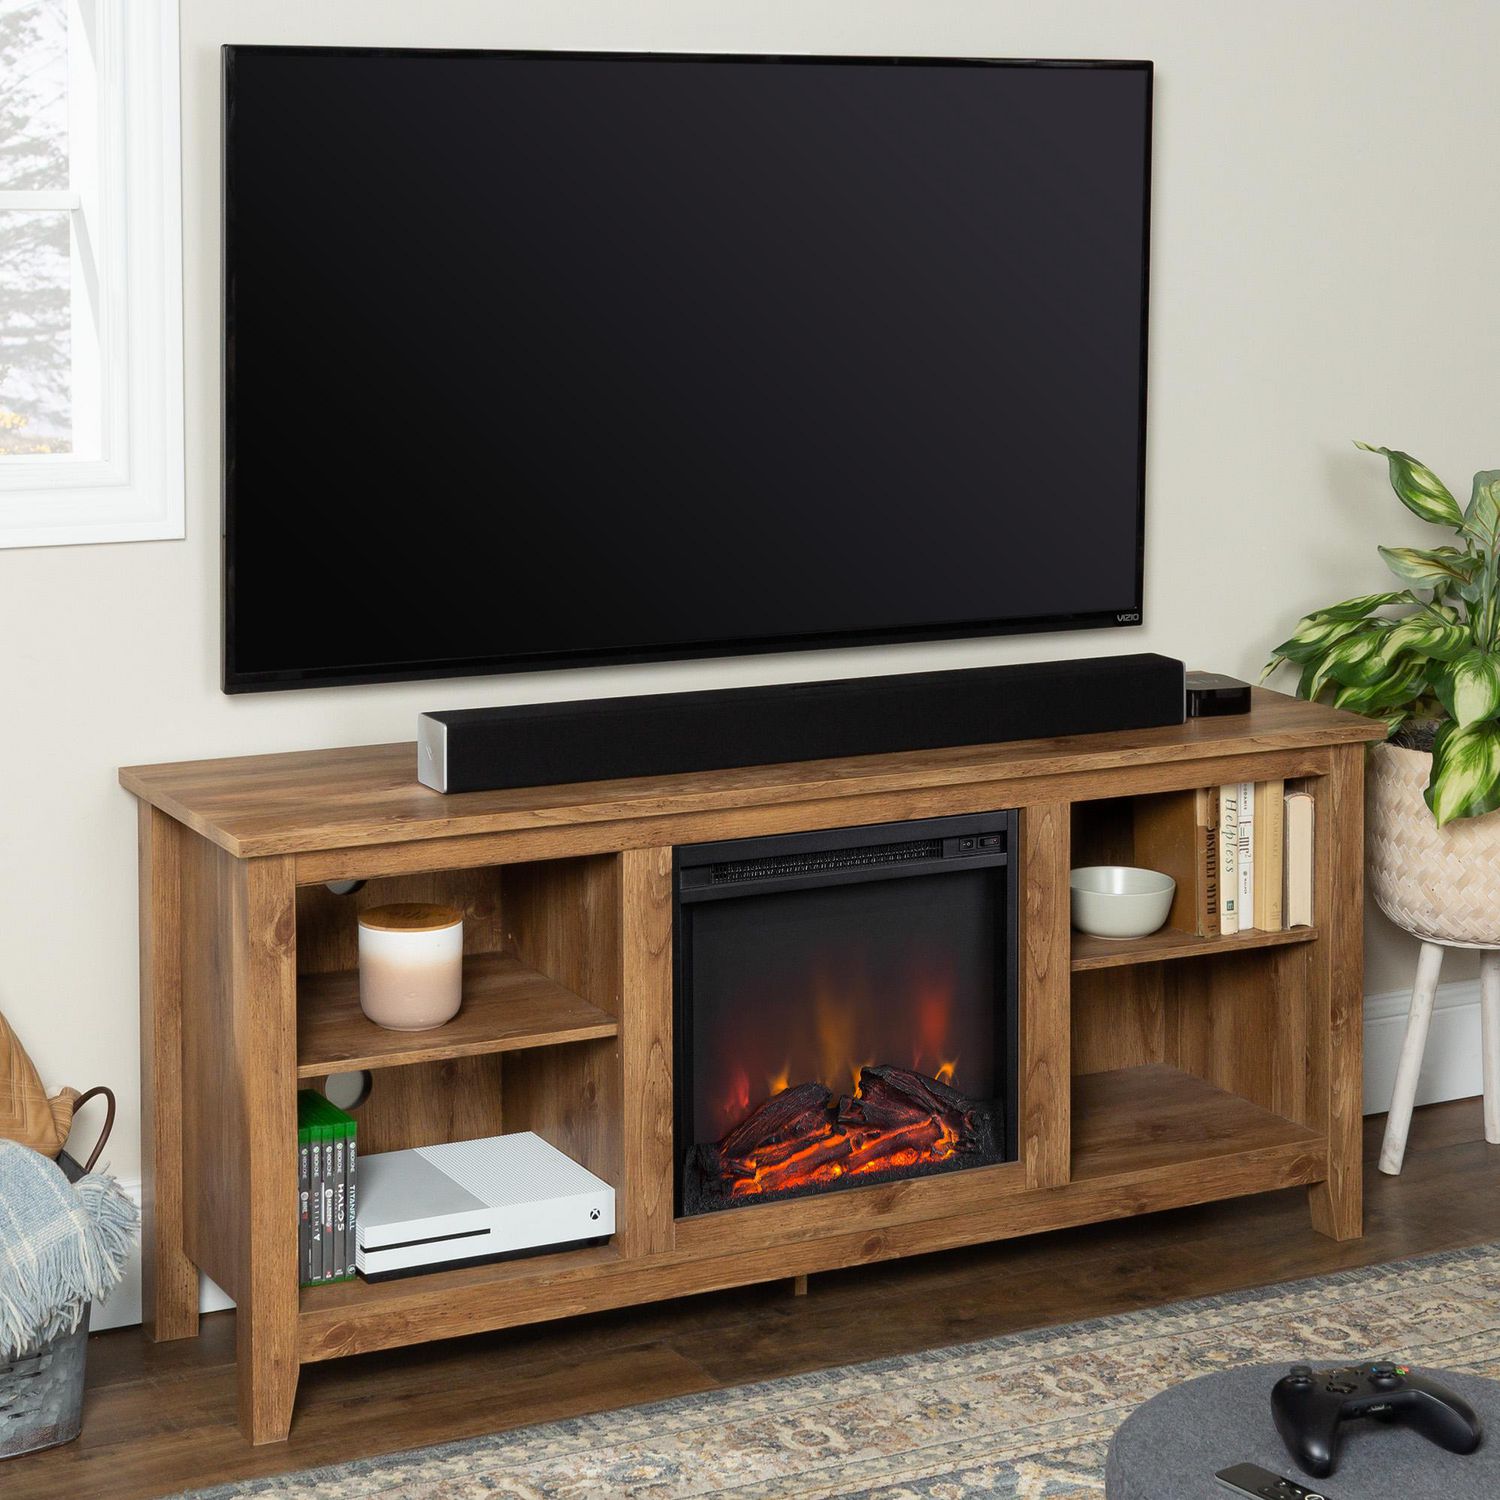 Manor Park Minimal Farmhouse Fireplace, Tv Stand With Fireplace Canada